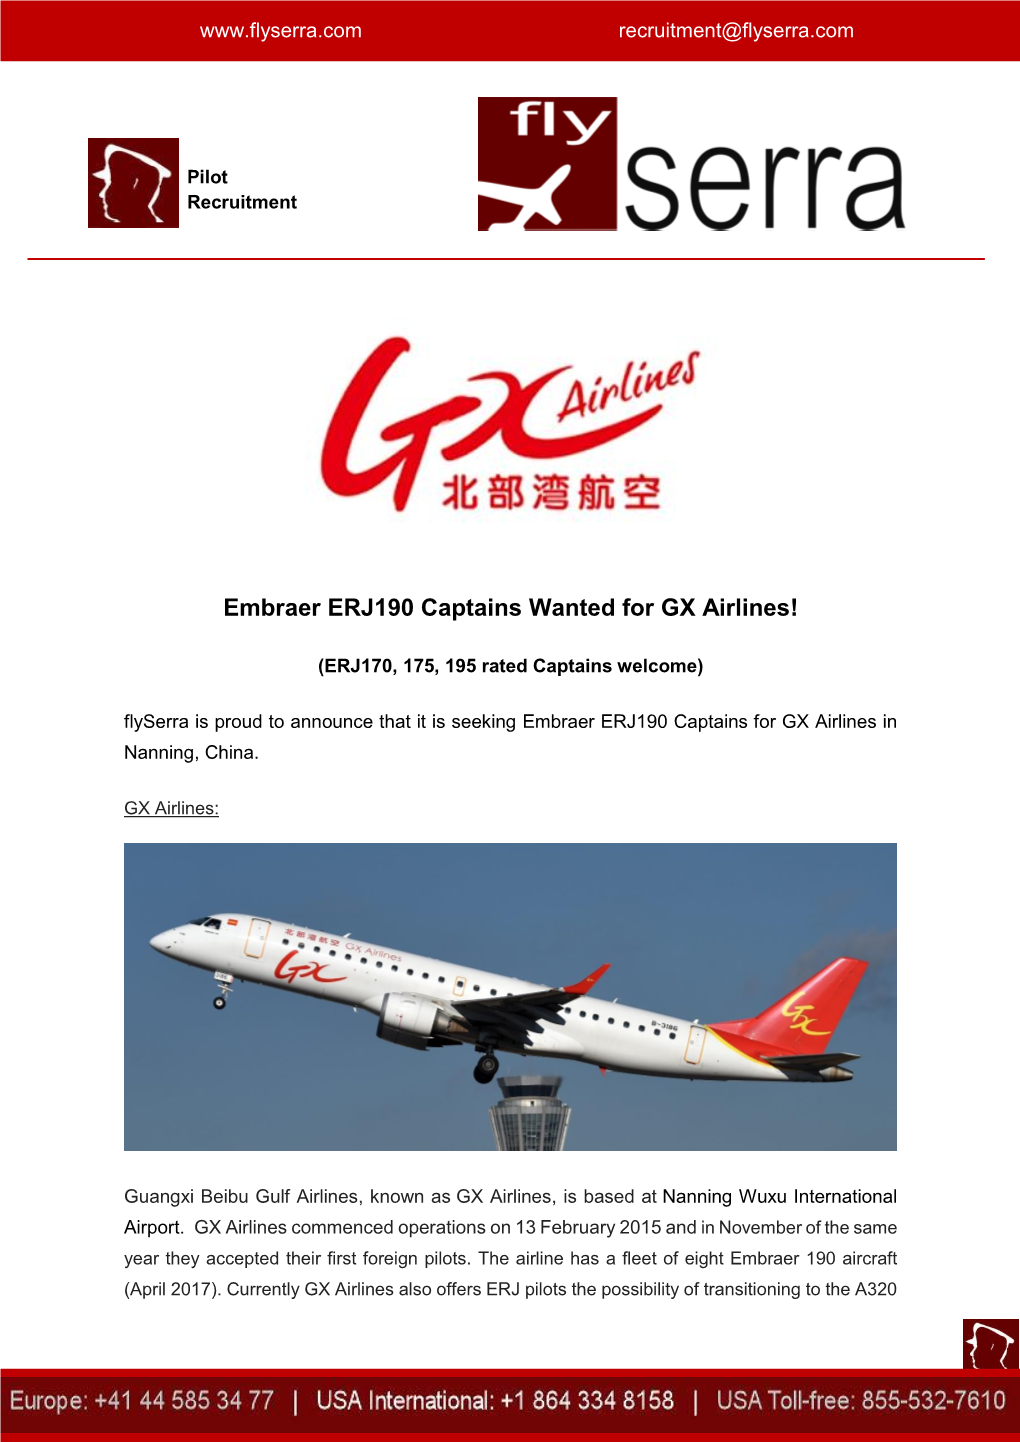 Embraer ERJ190 Captains Wanted for GX Airlines!